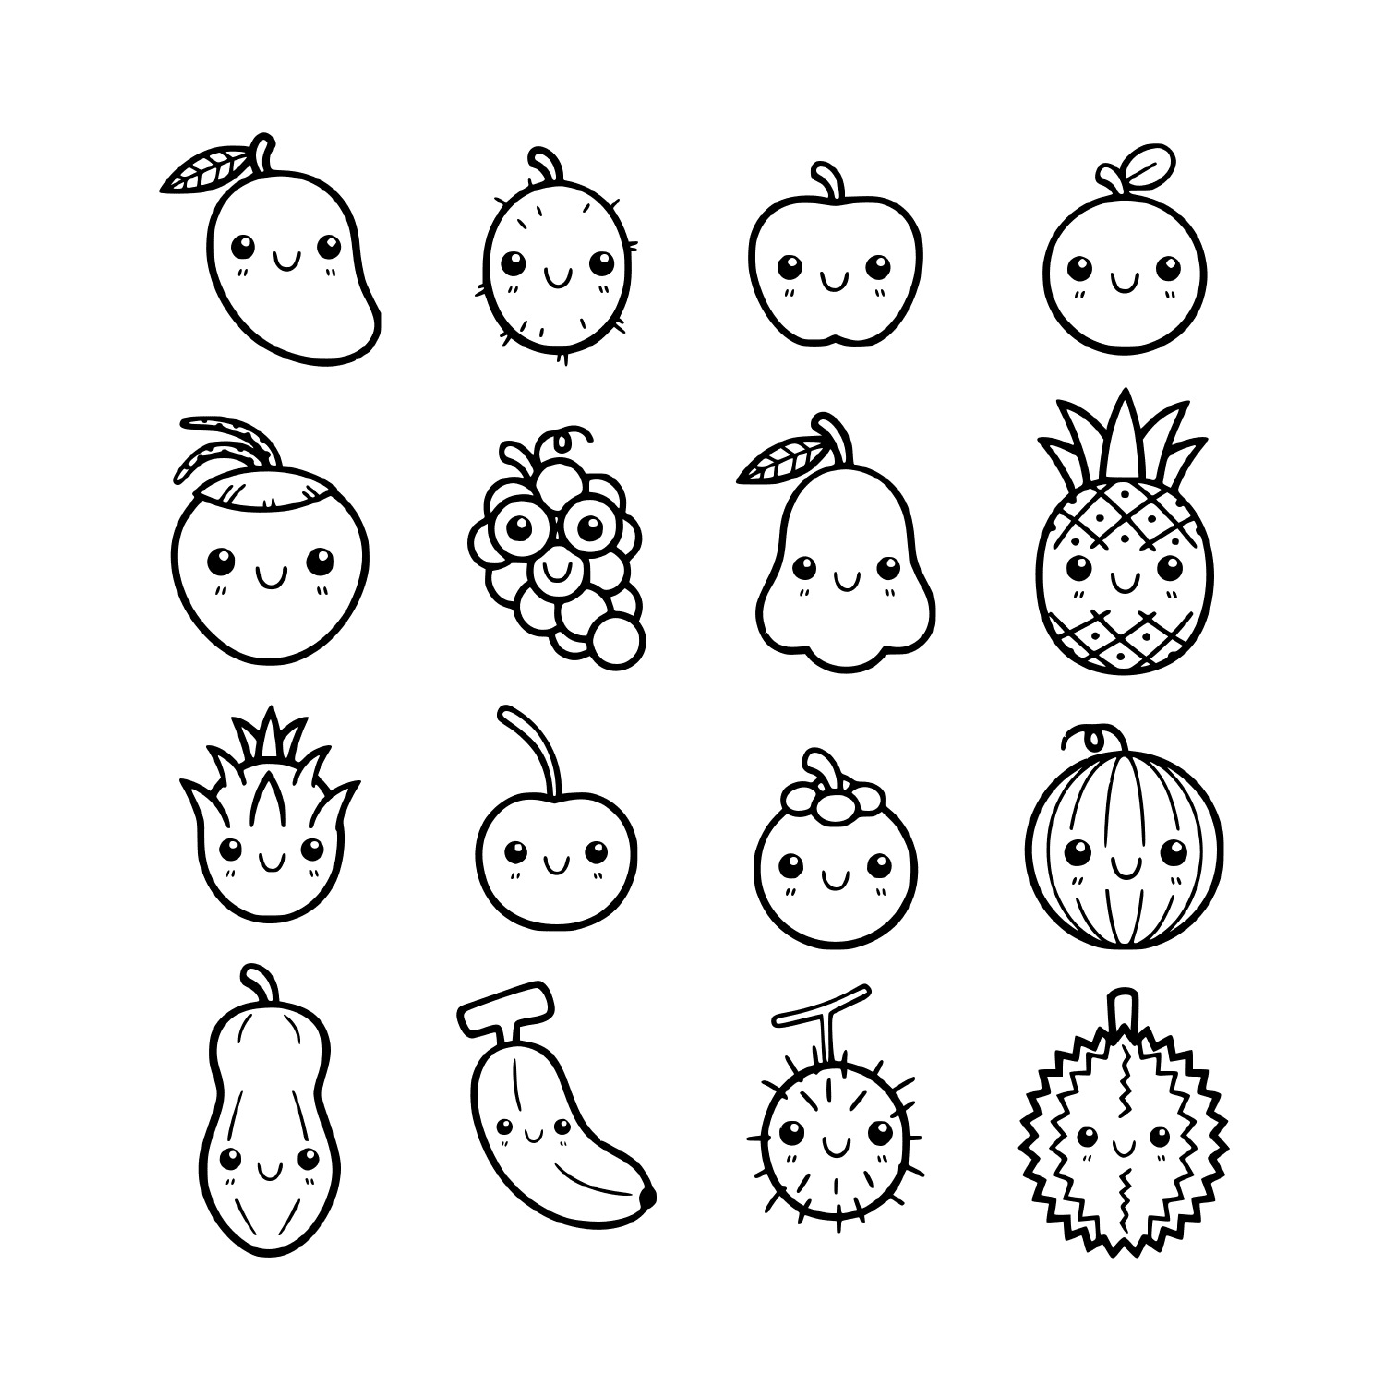  Cute and adorable fruits 